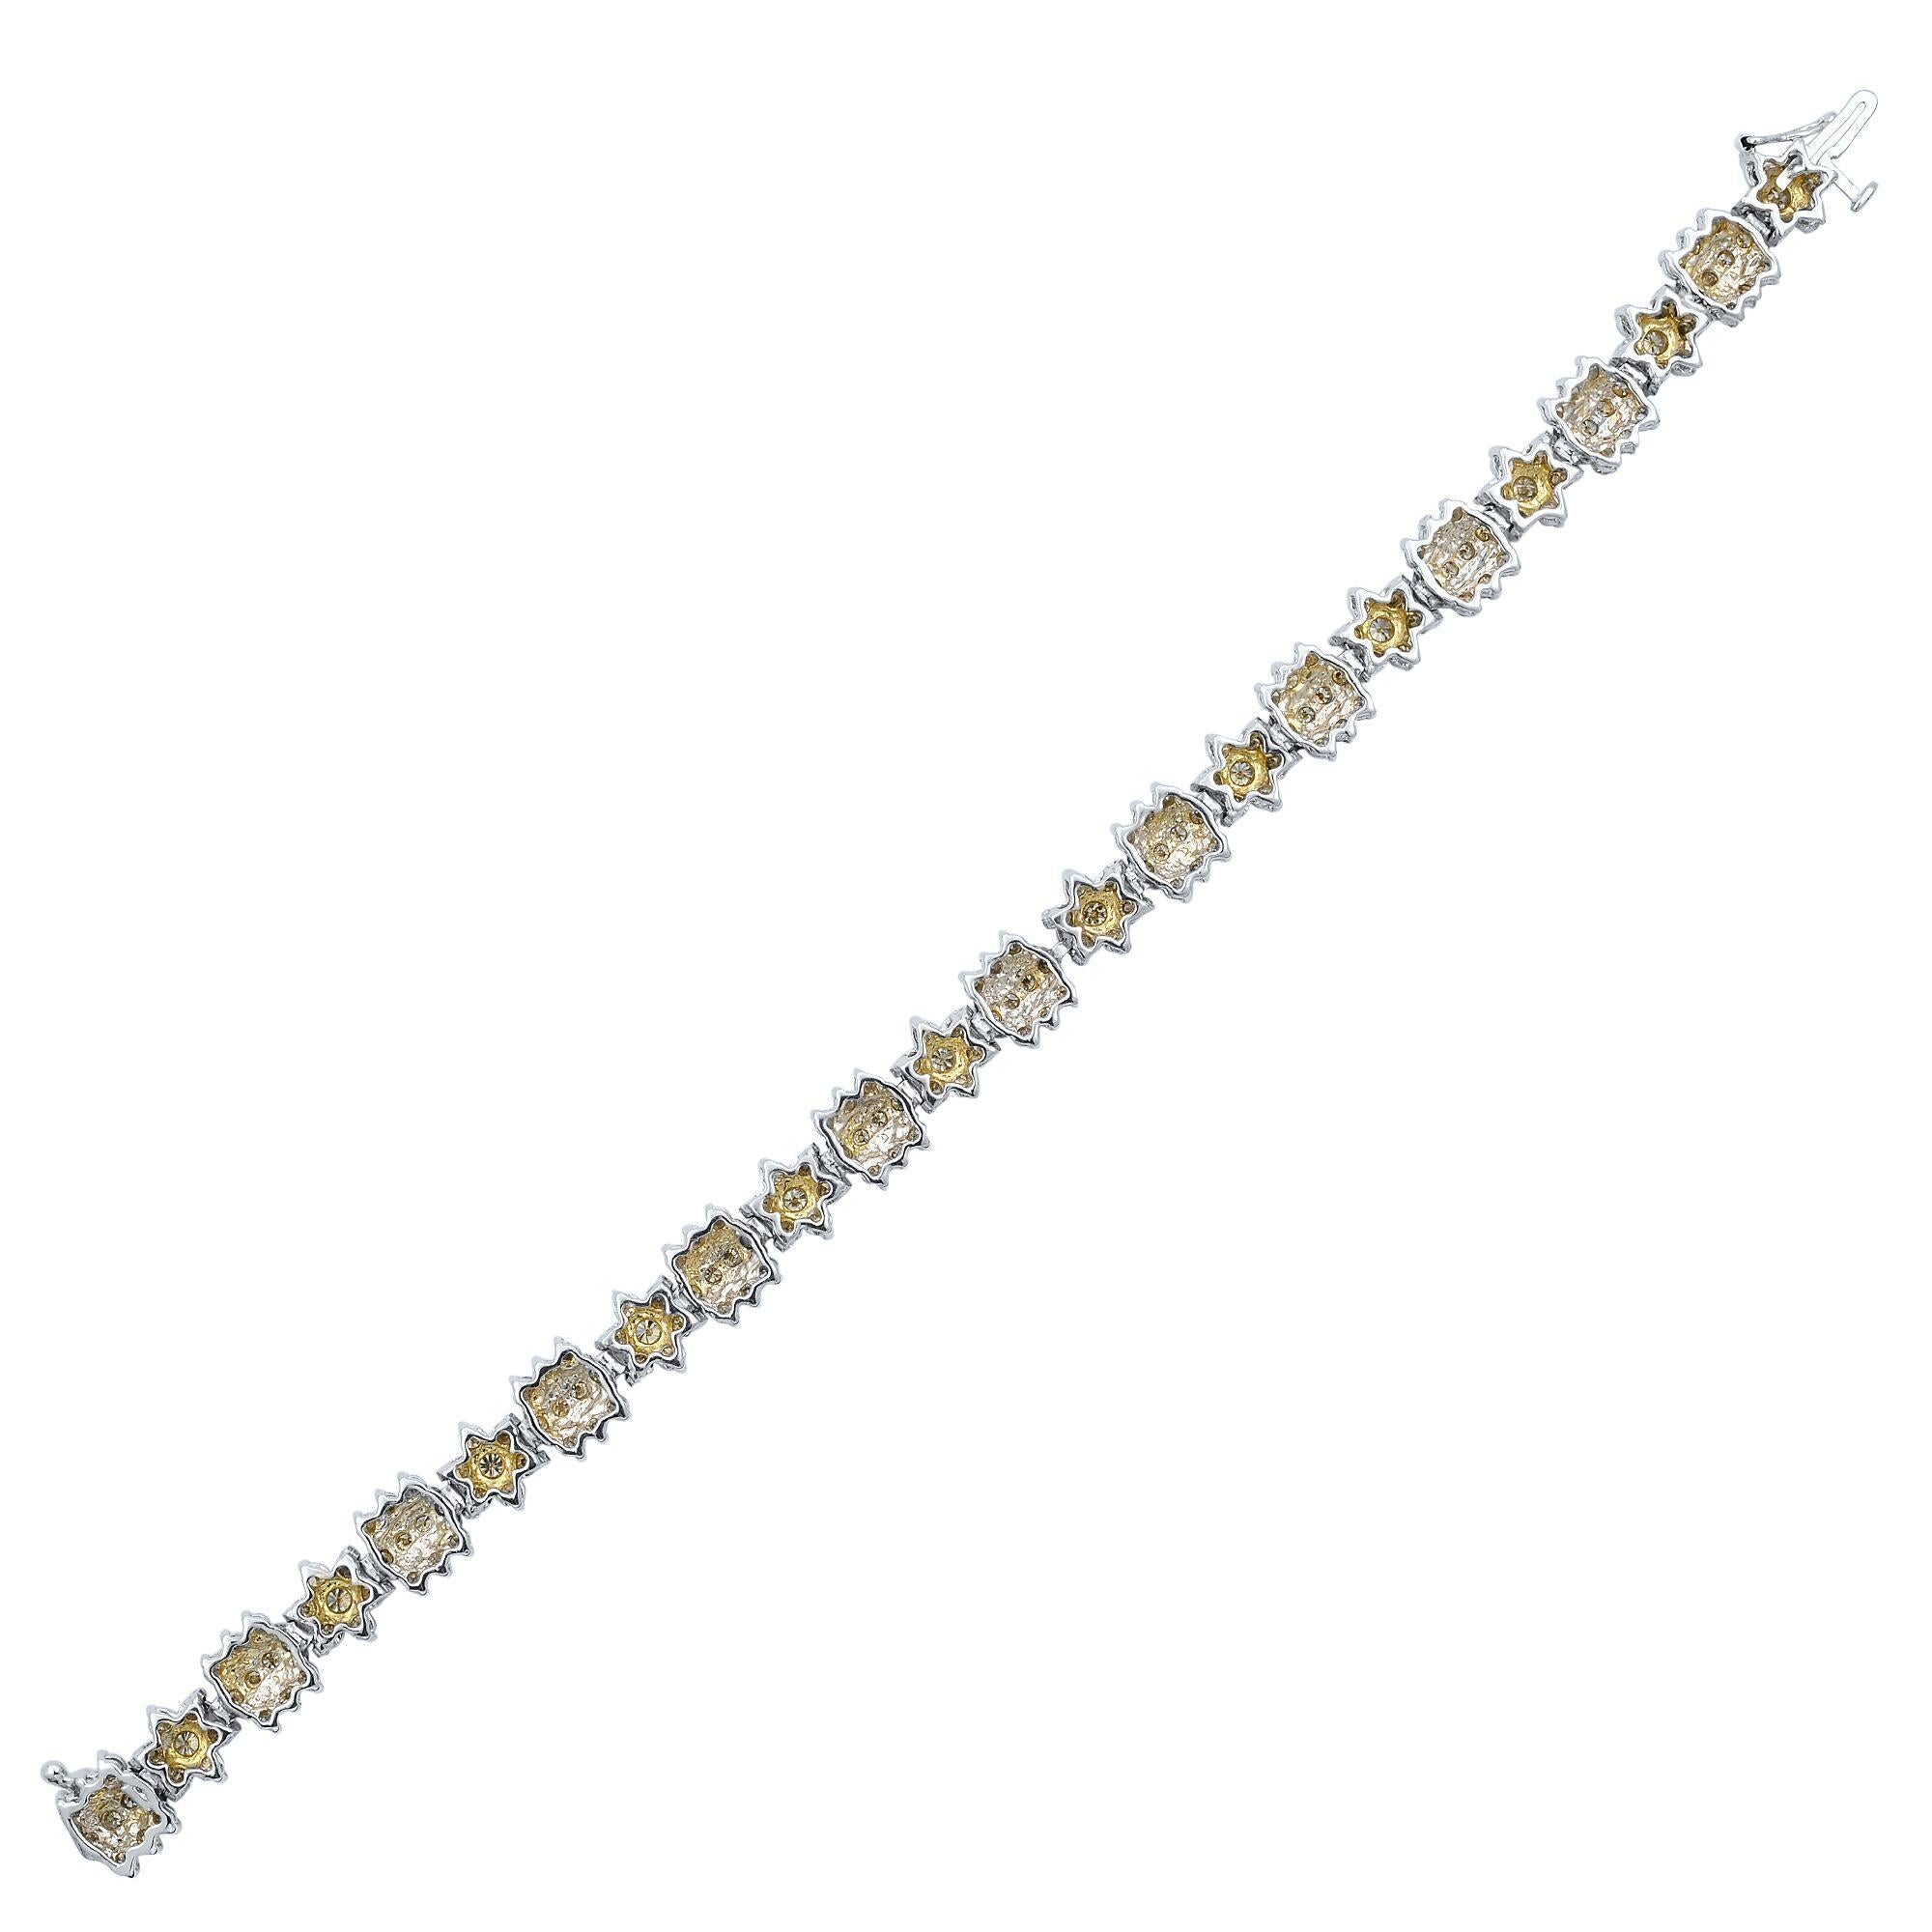 Beautiful diamond floral bracelet. crafted in 14K Yellow Gold Rhodium Plated. Features round brilliant cut diamonds weighing 6.00 carats. Comes with a presentable jewelry box.